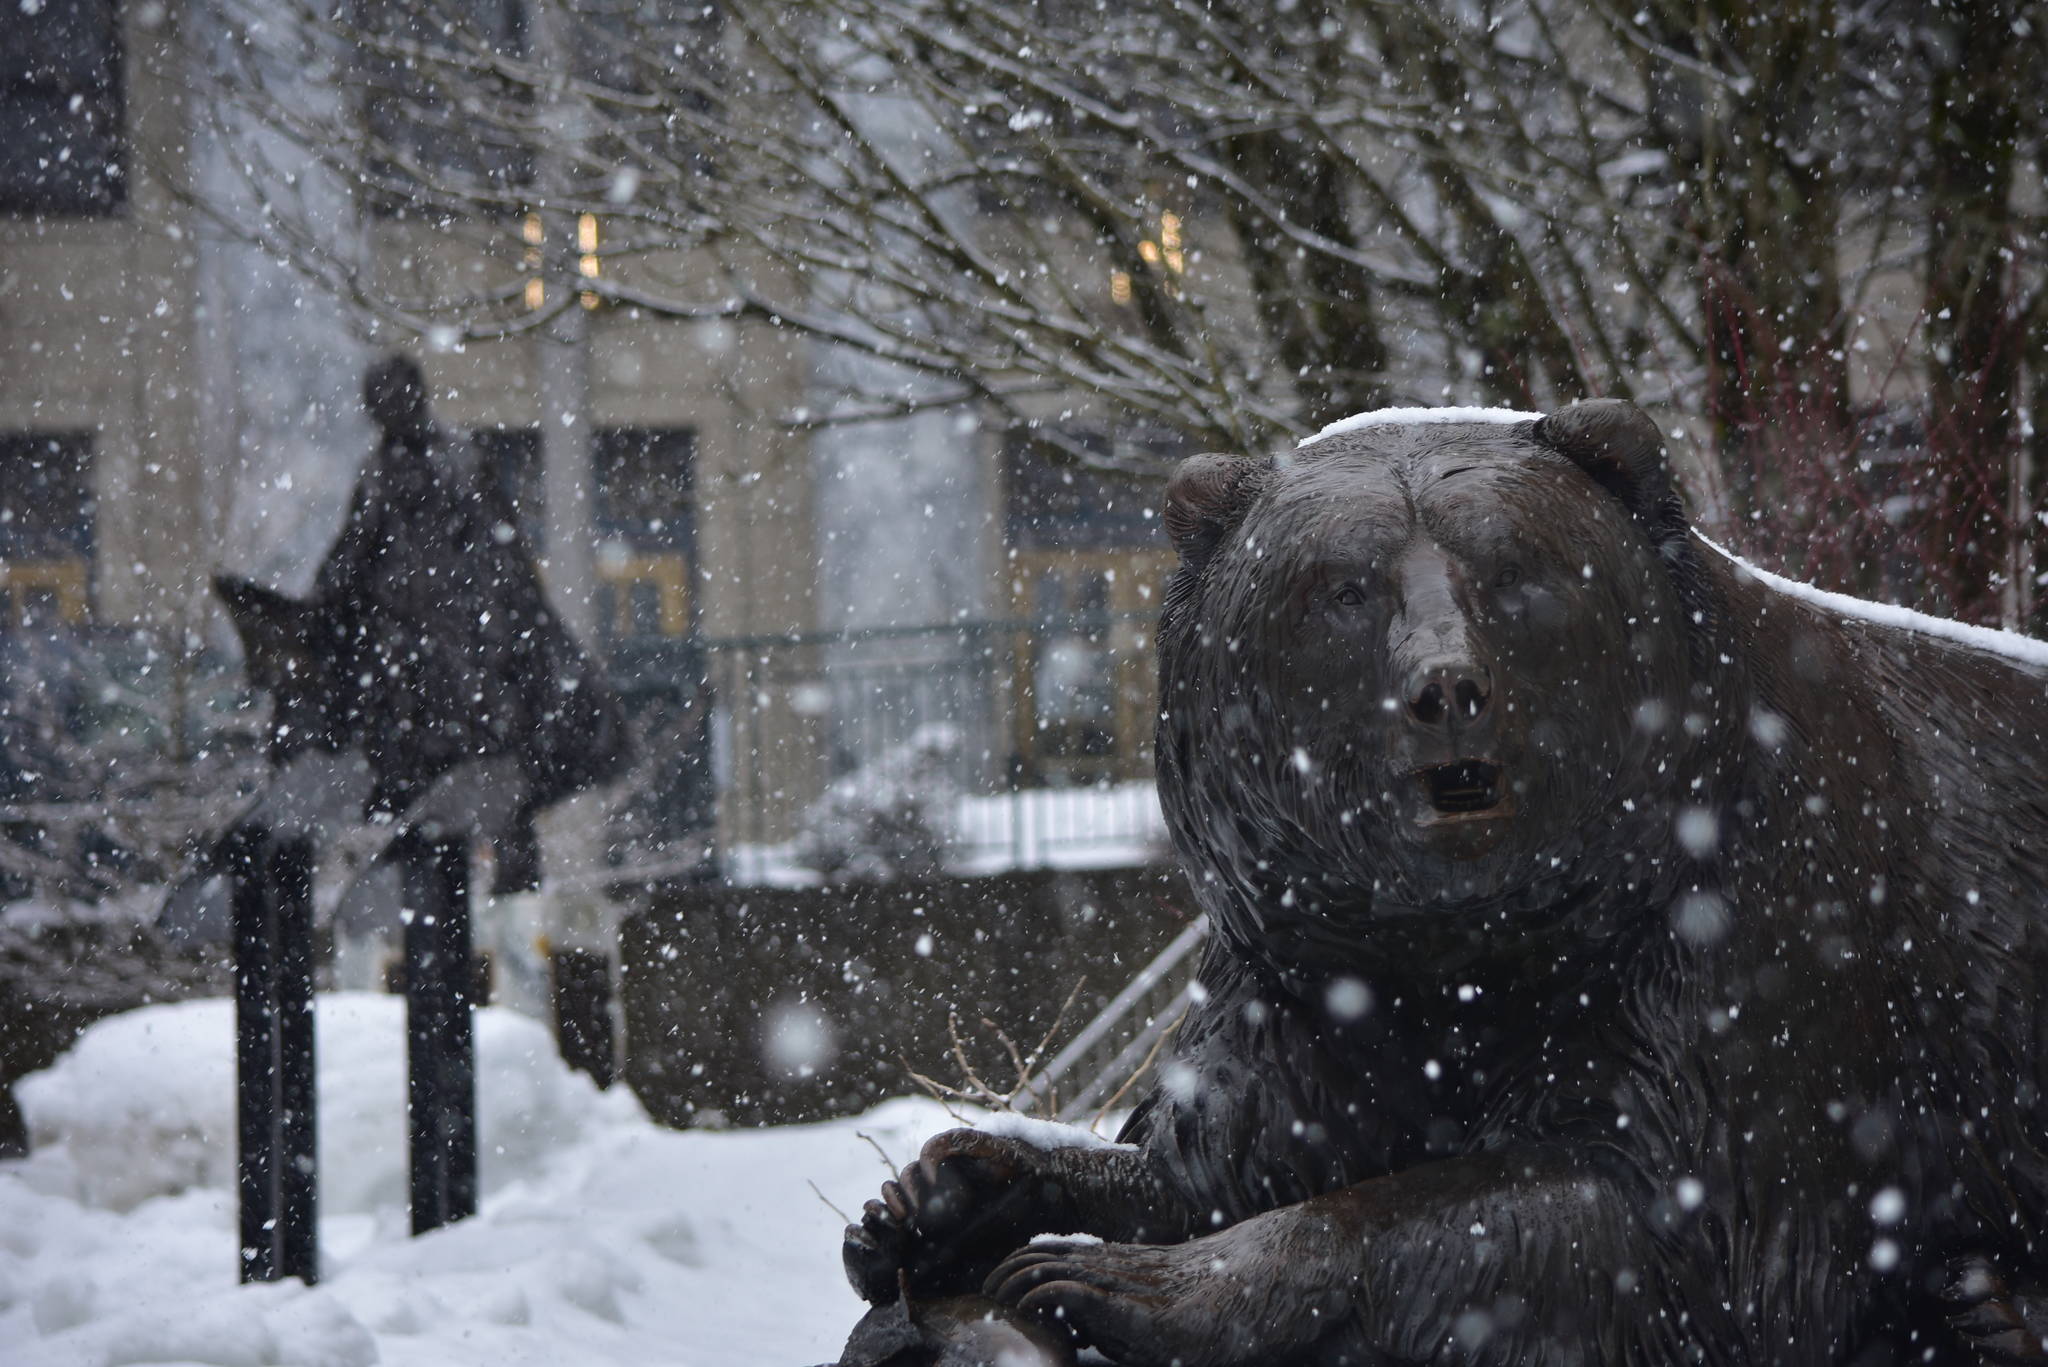 A bear statue near the Alaska State Capitol Building stares pensively into the snow as inches fall on Juneau as part of a series of winter storm systems on March 22, 2021. (Peter Segall / Juneau Empire)